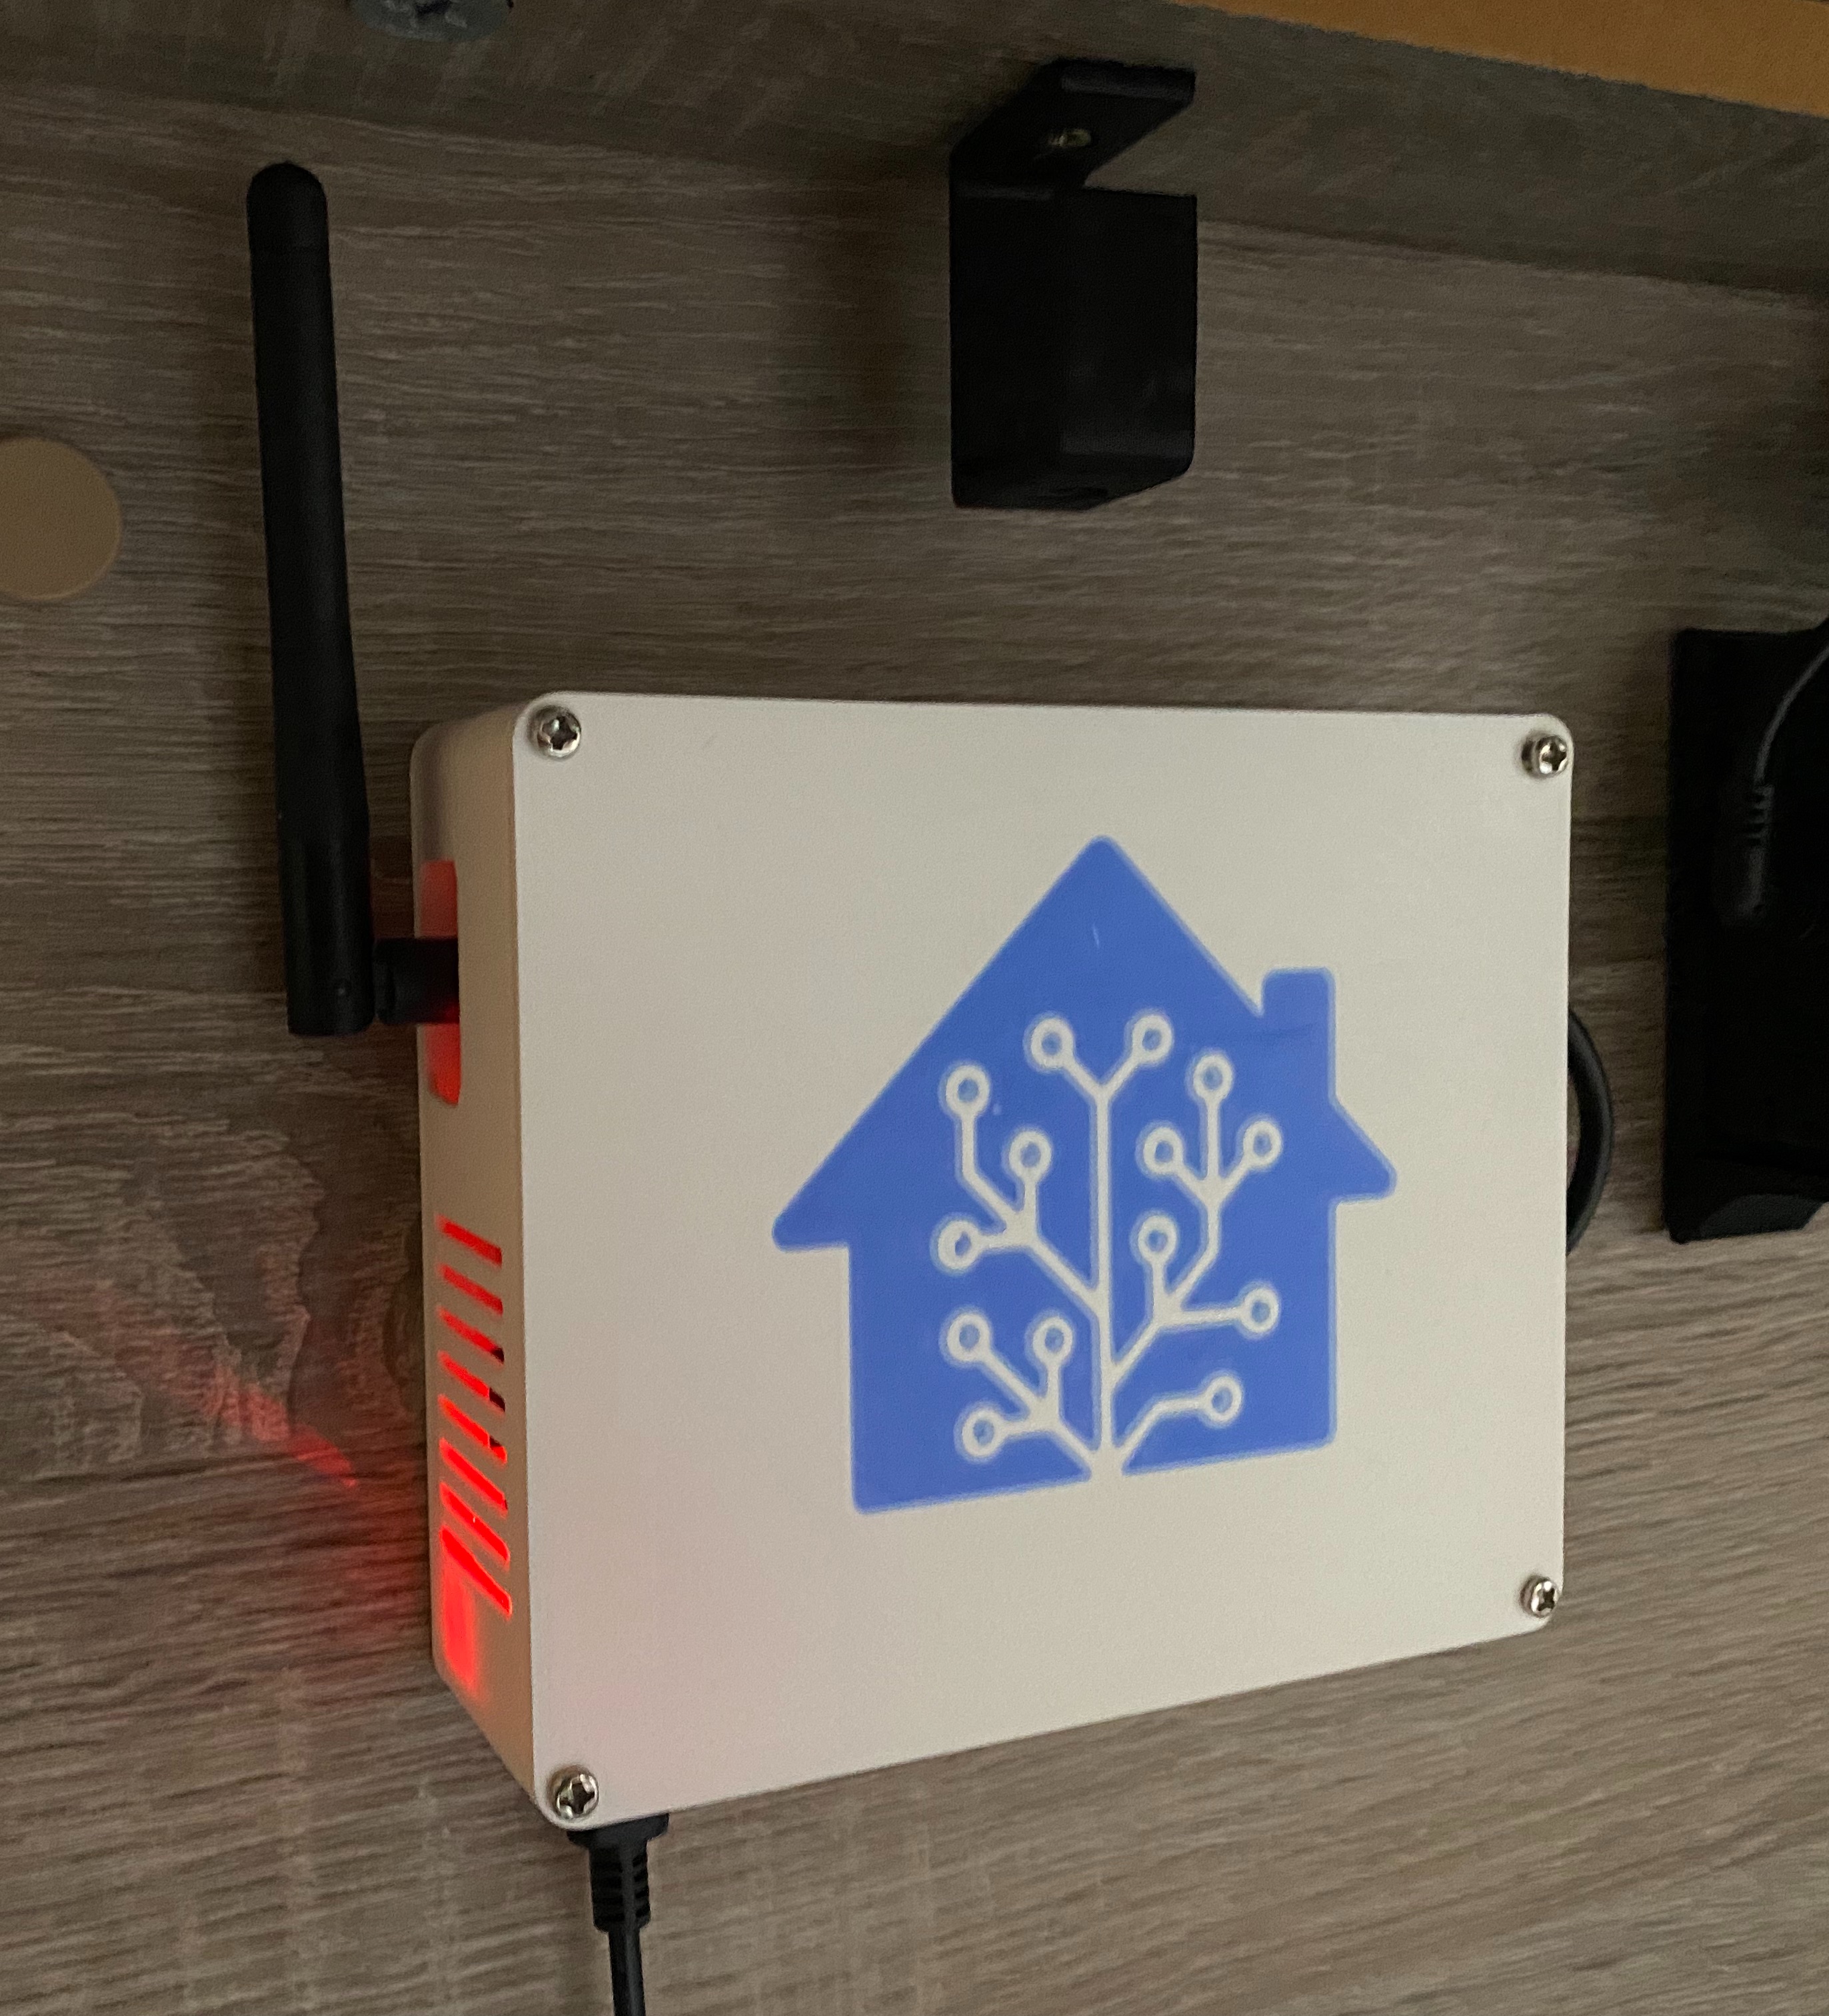 home assistant box